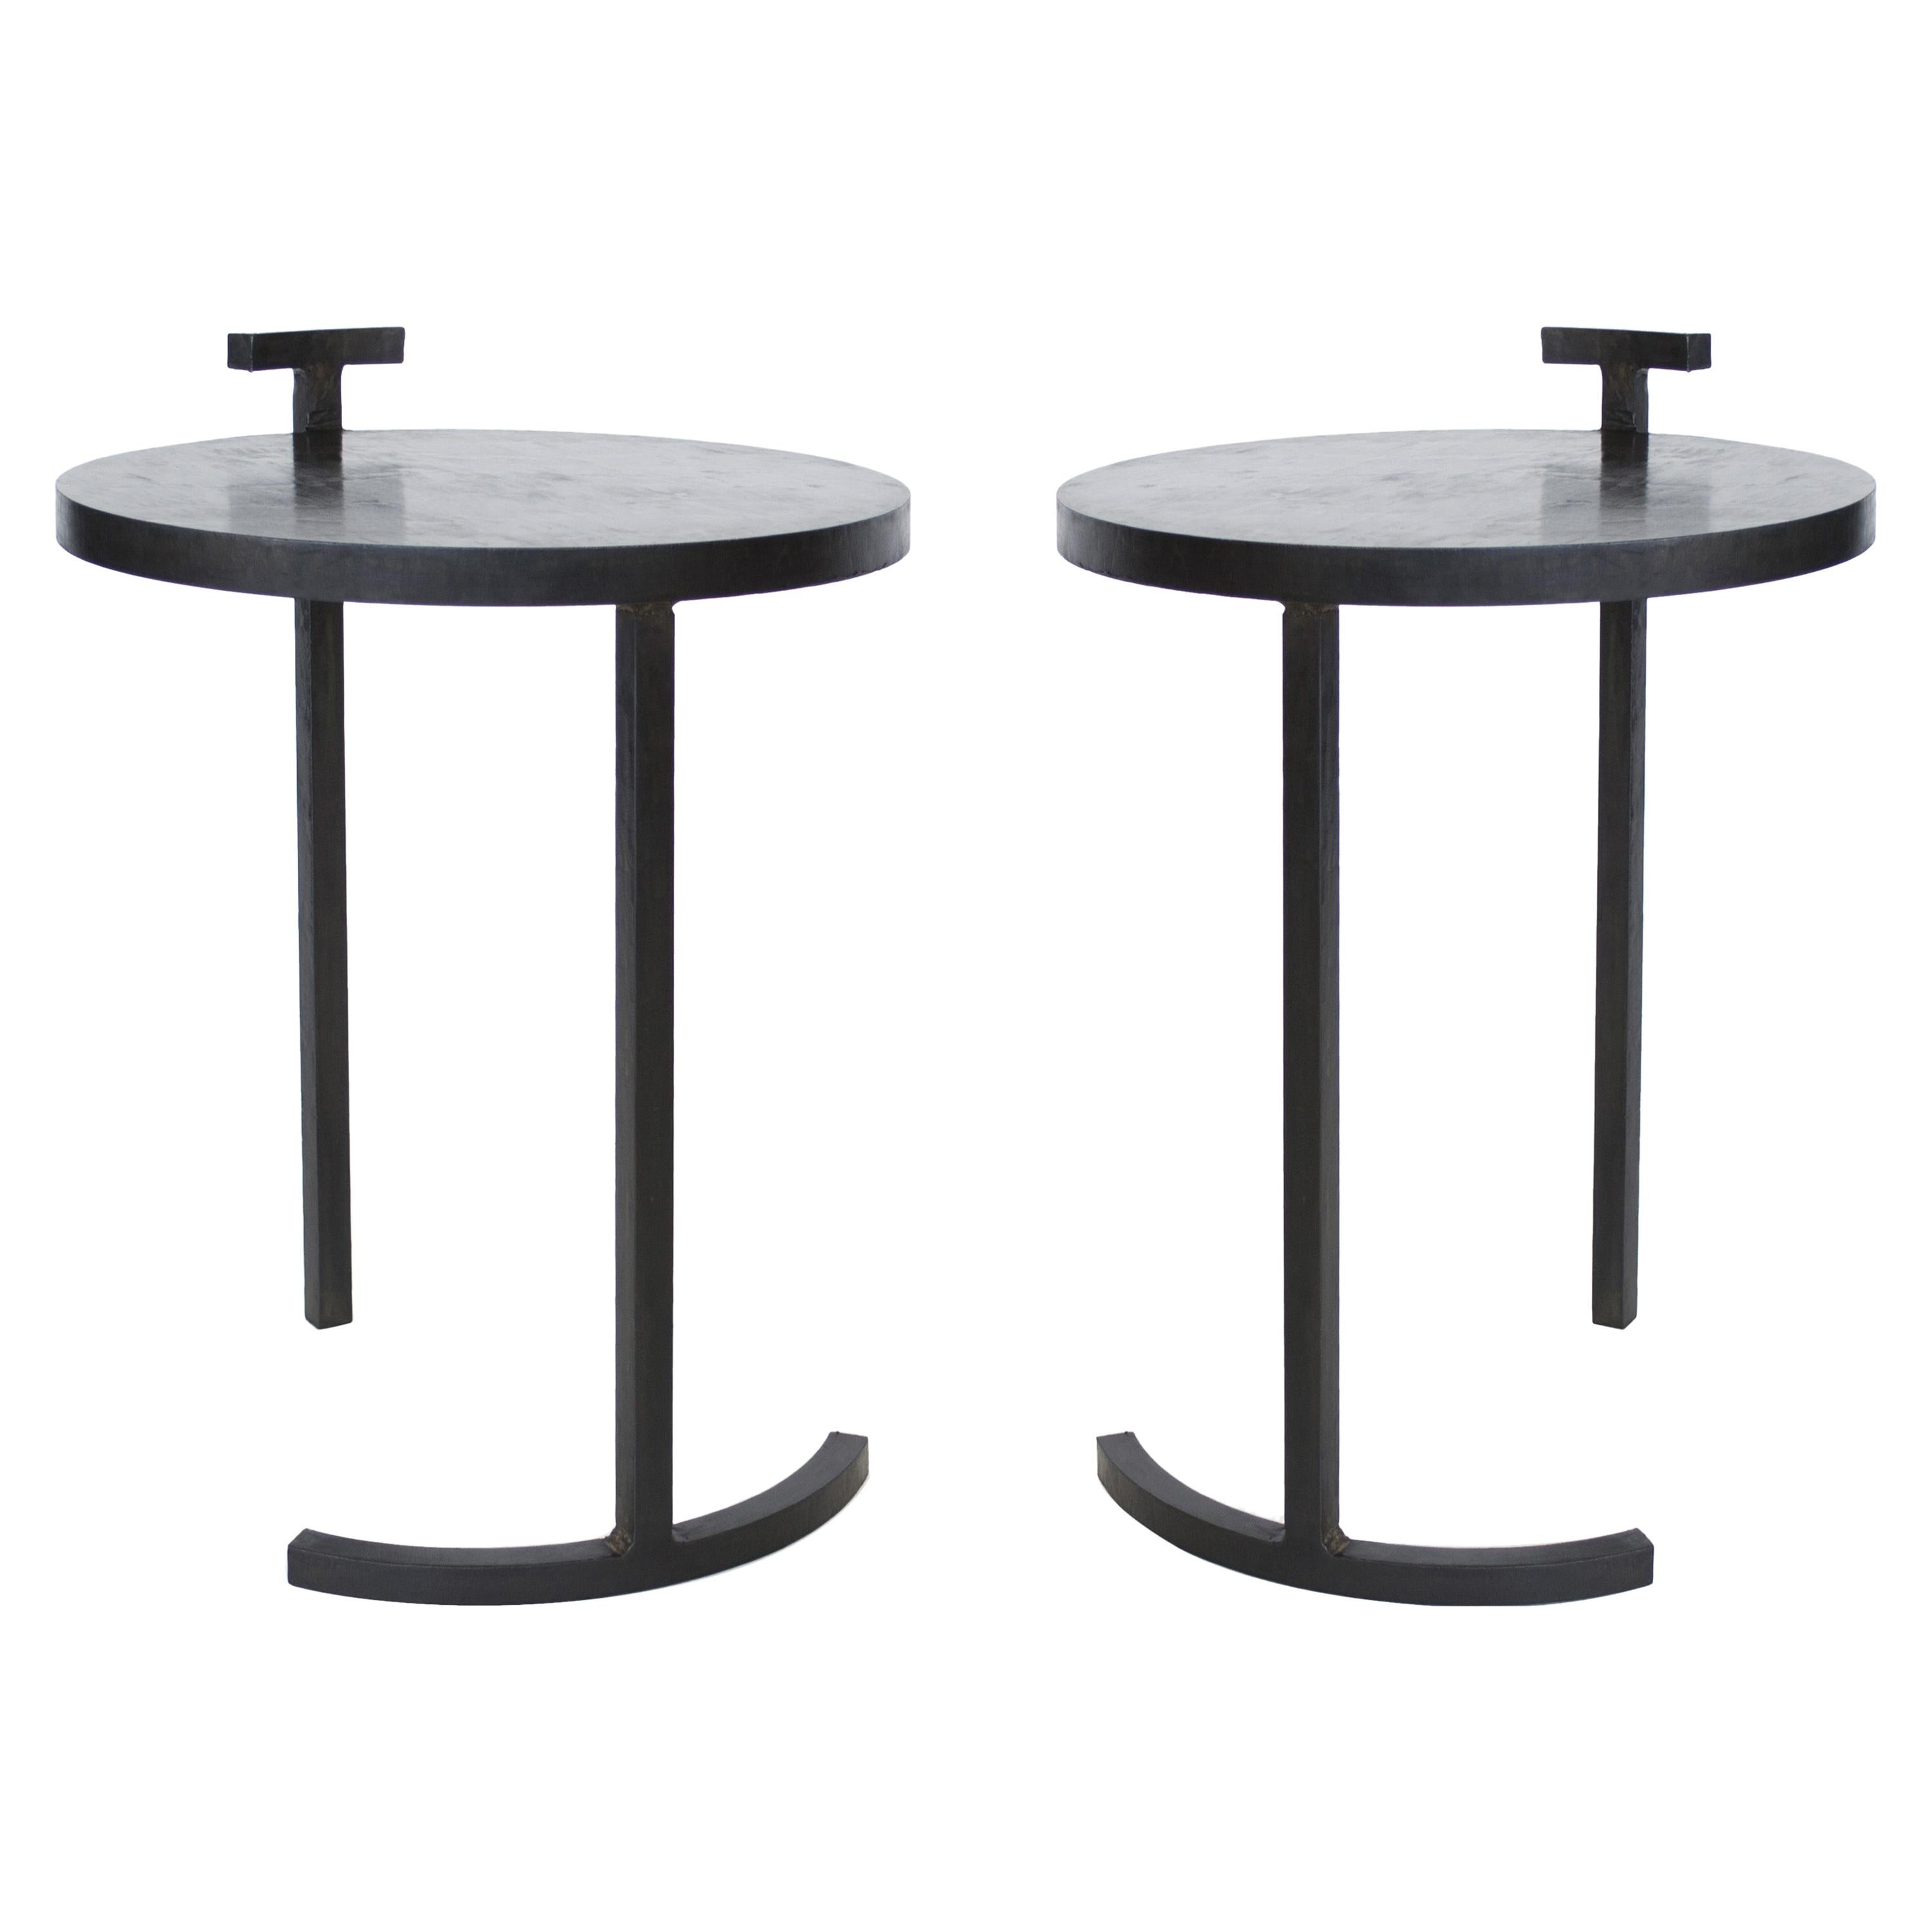 Pair of Modern Side Tables Minimalist Handmade in Cast Blackened and Waxed Steel